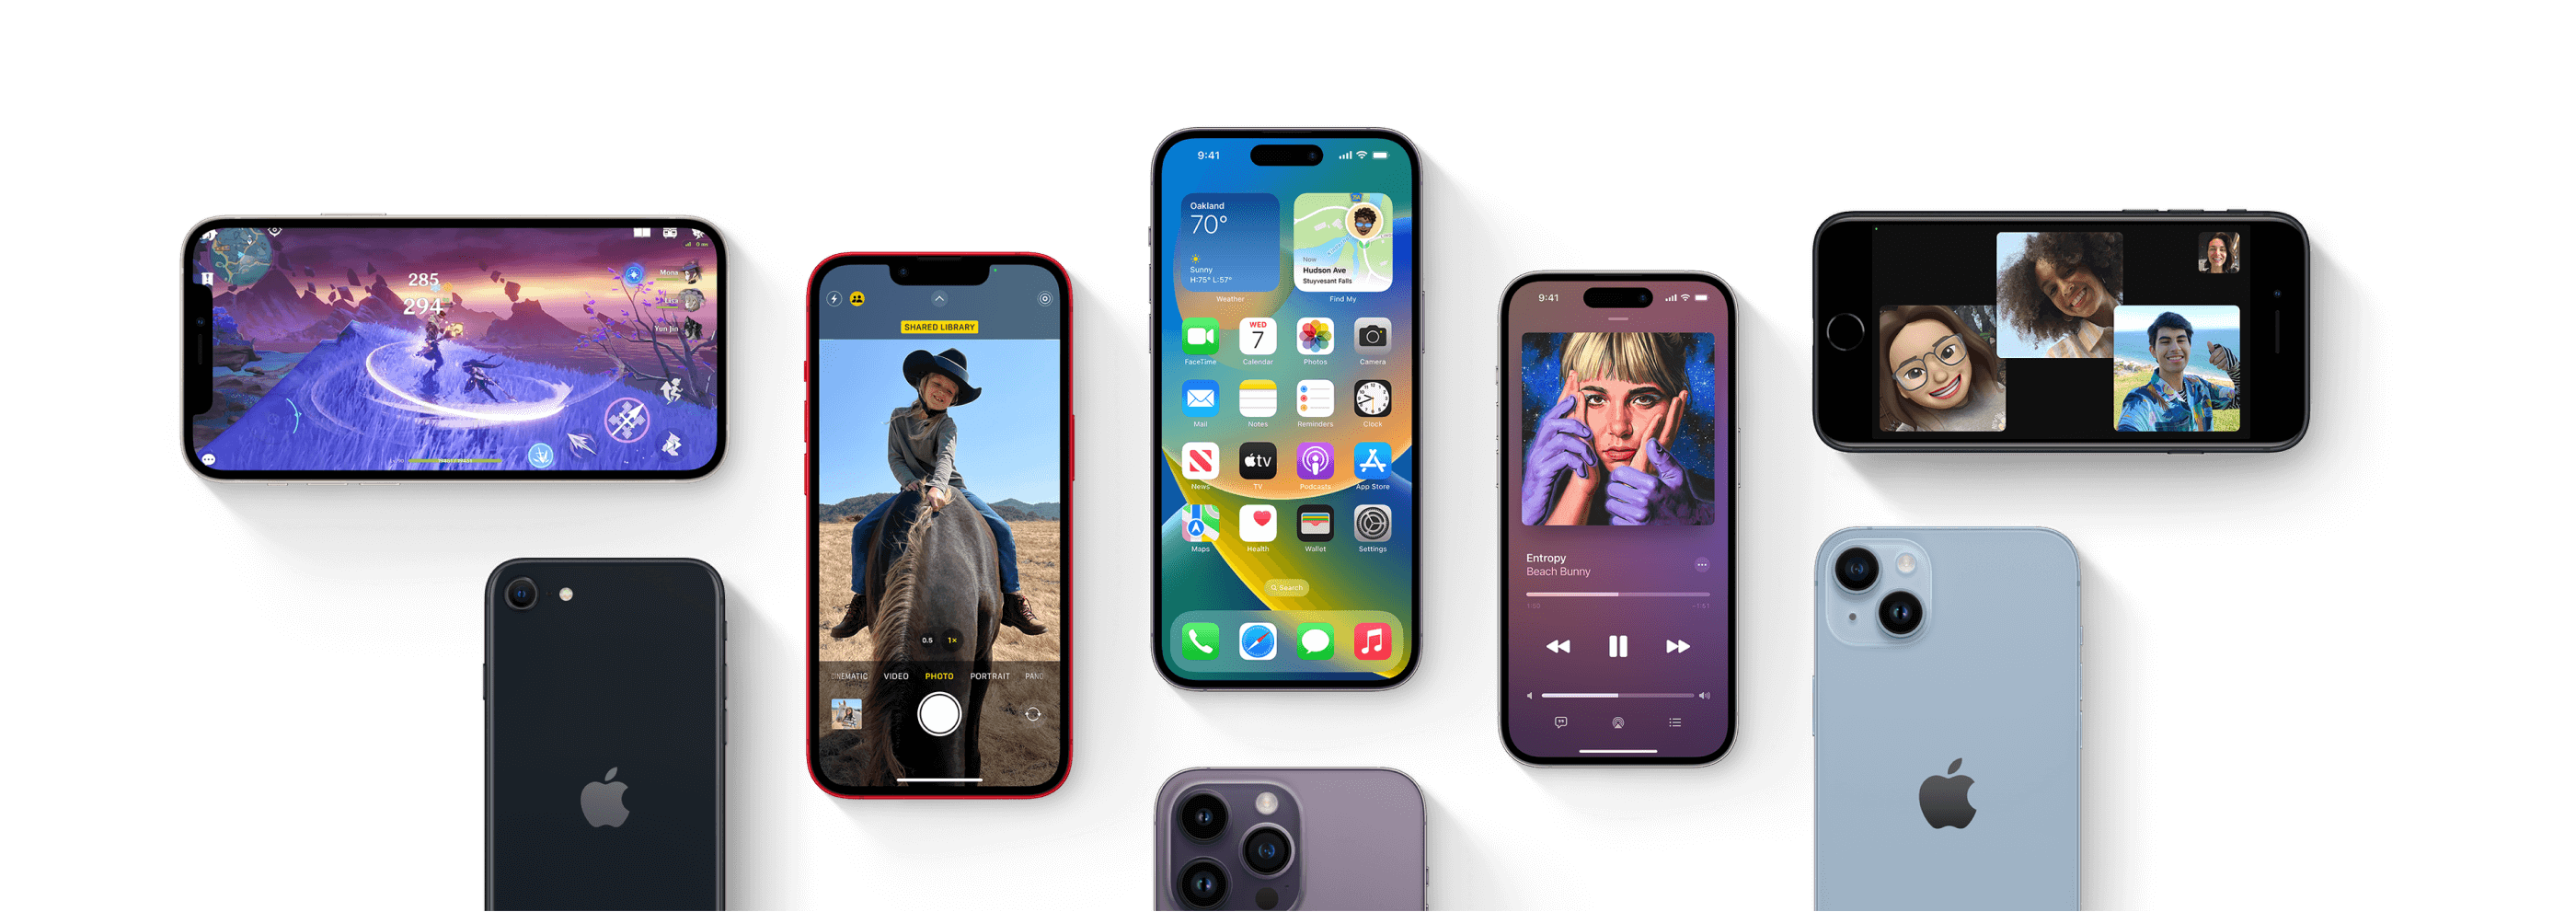 iPhone devices banner image